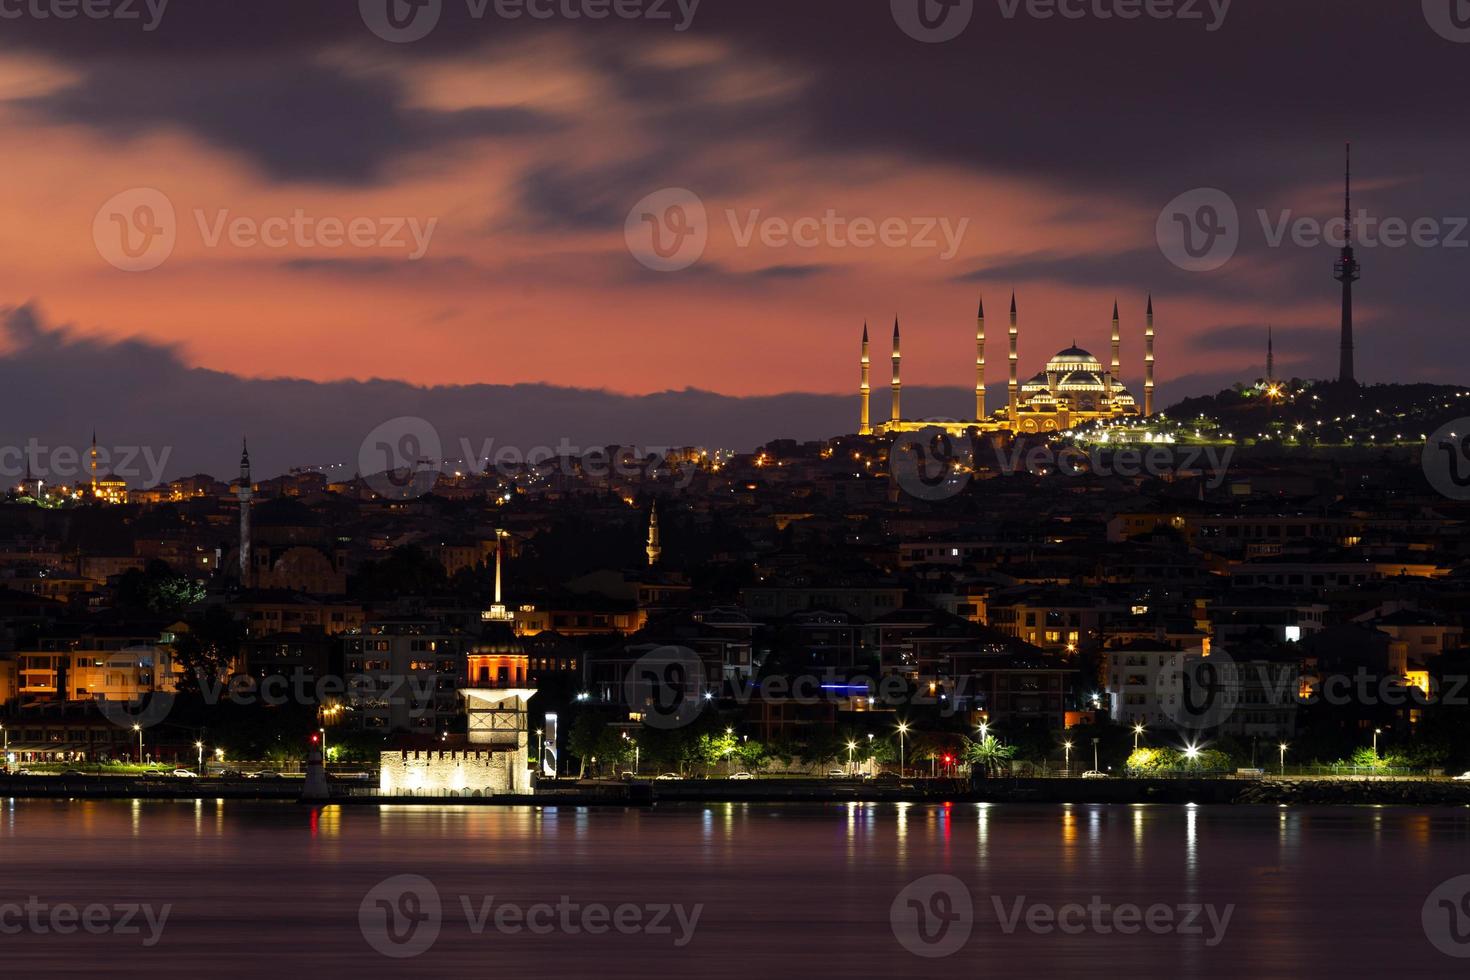 Maidens Tower and Camlica Mosque in Istanbul, Turkey photo